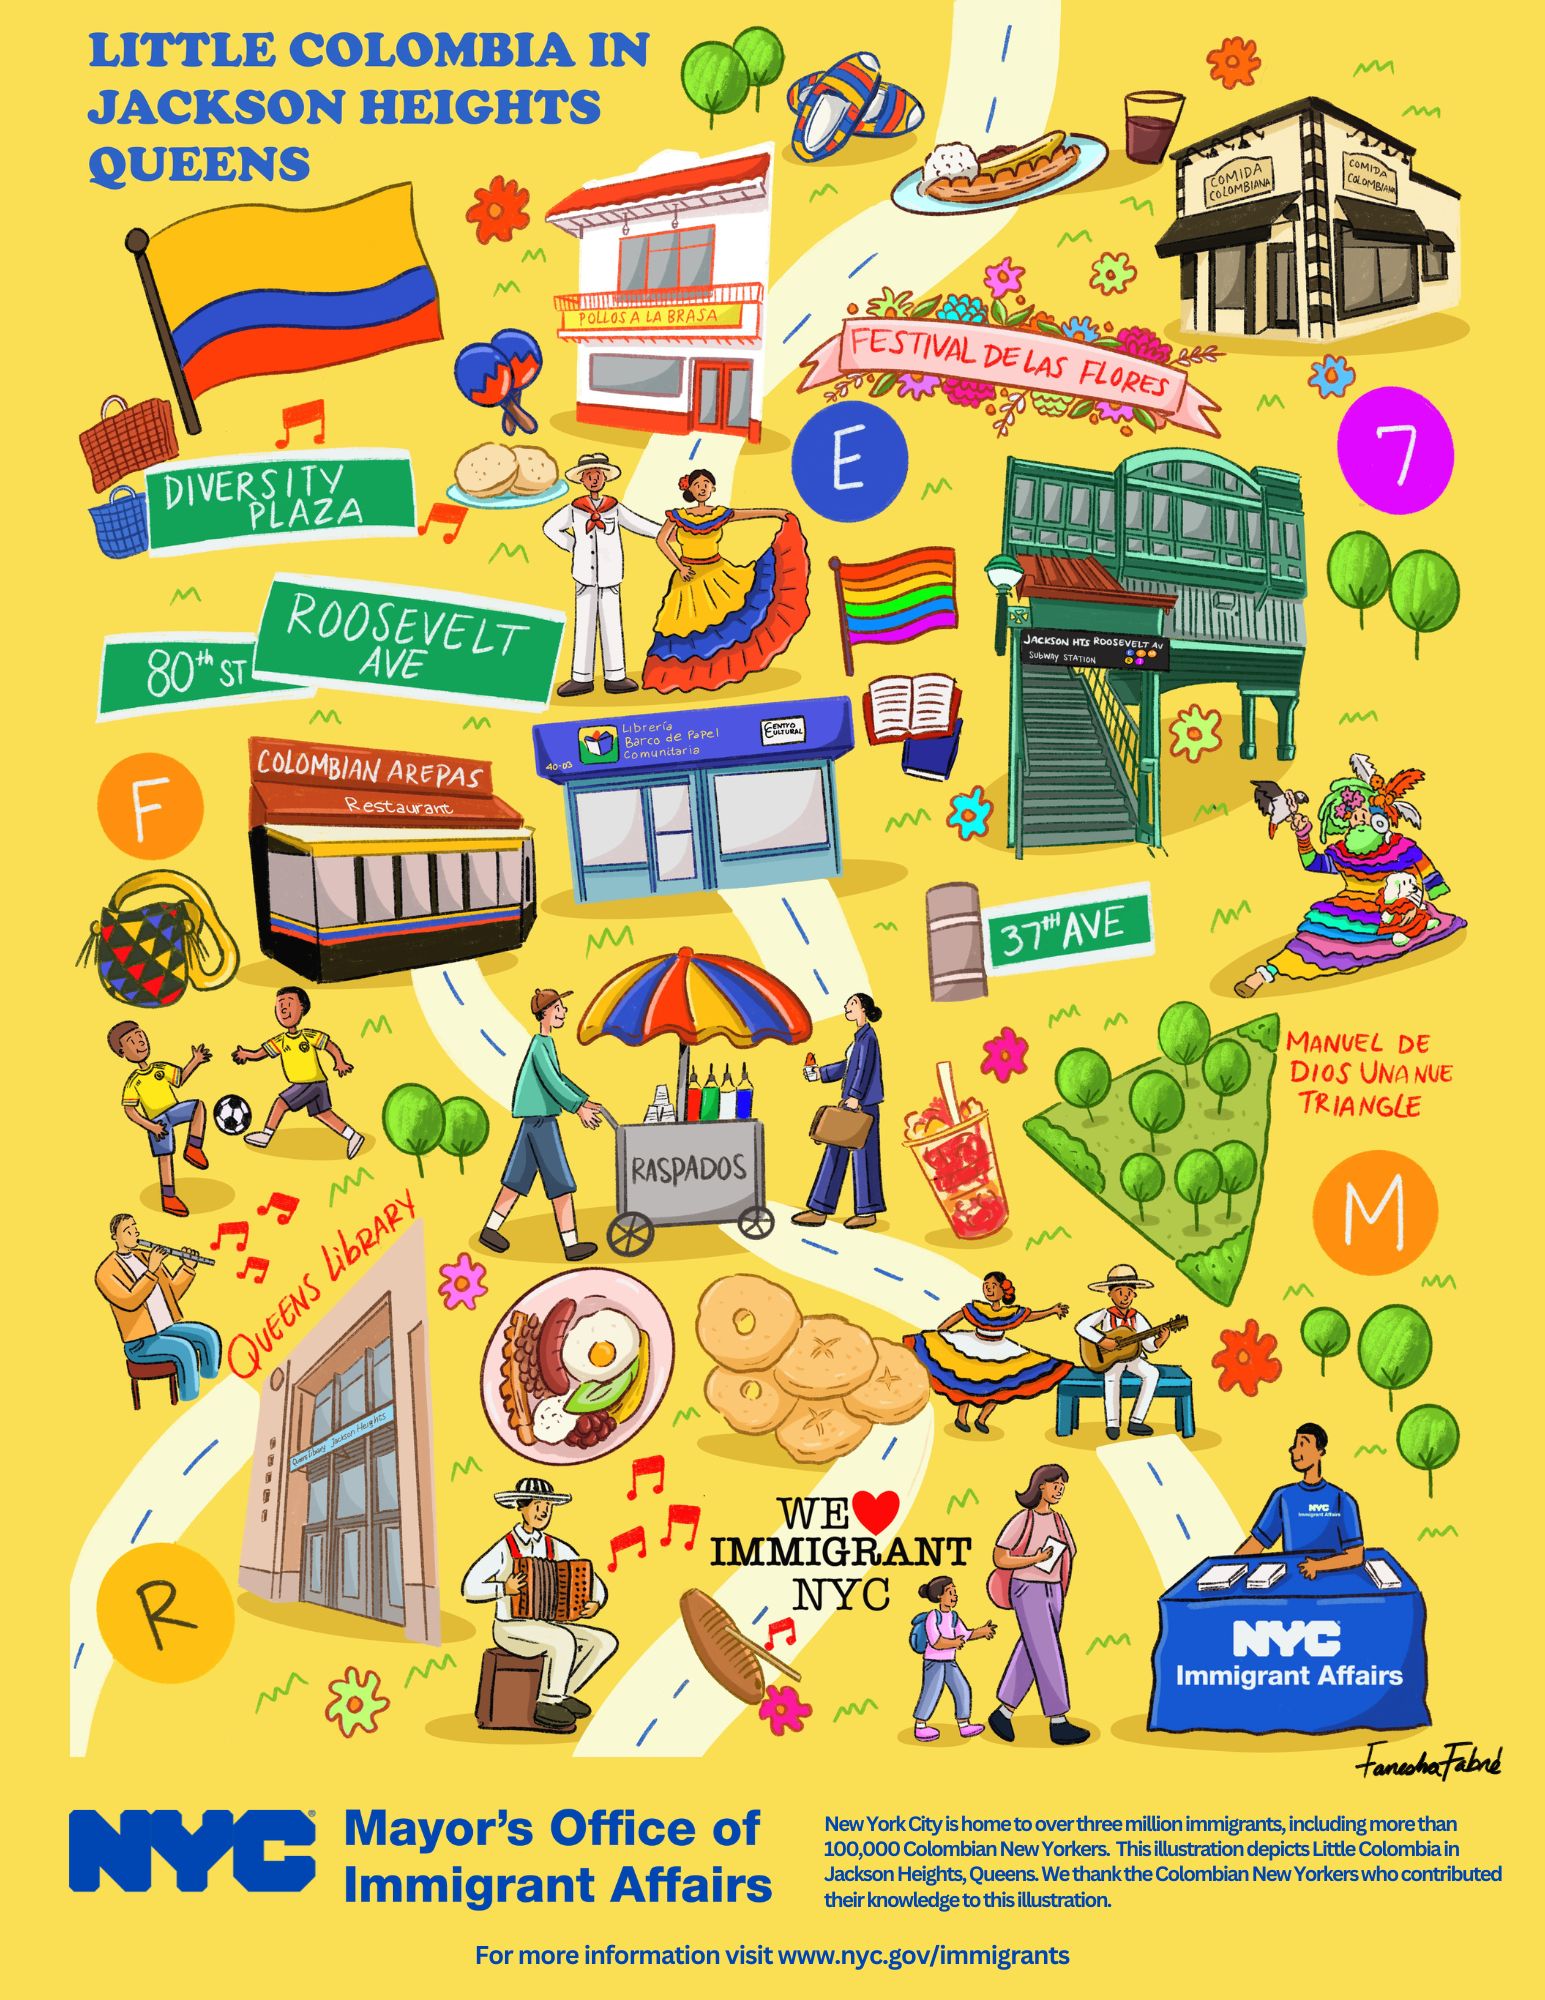 A graphic of Little Colombia in Jackson Heights, Queens.